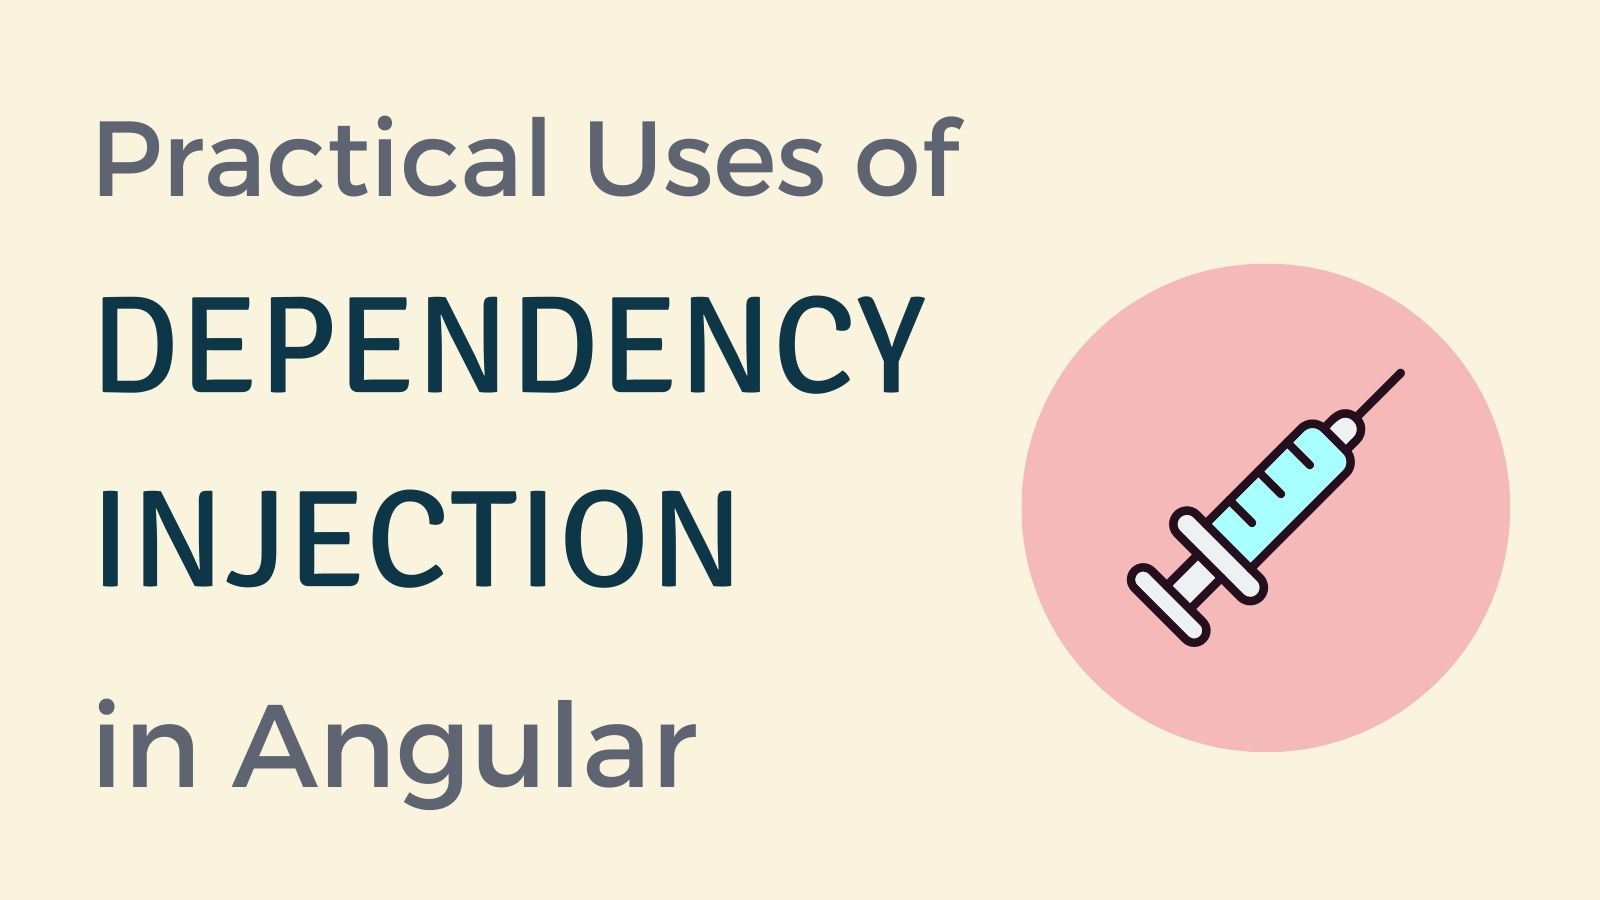 Practical Uses of Dependency Injection in Angular